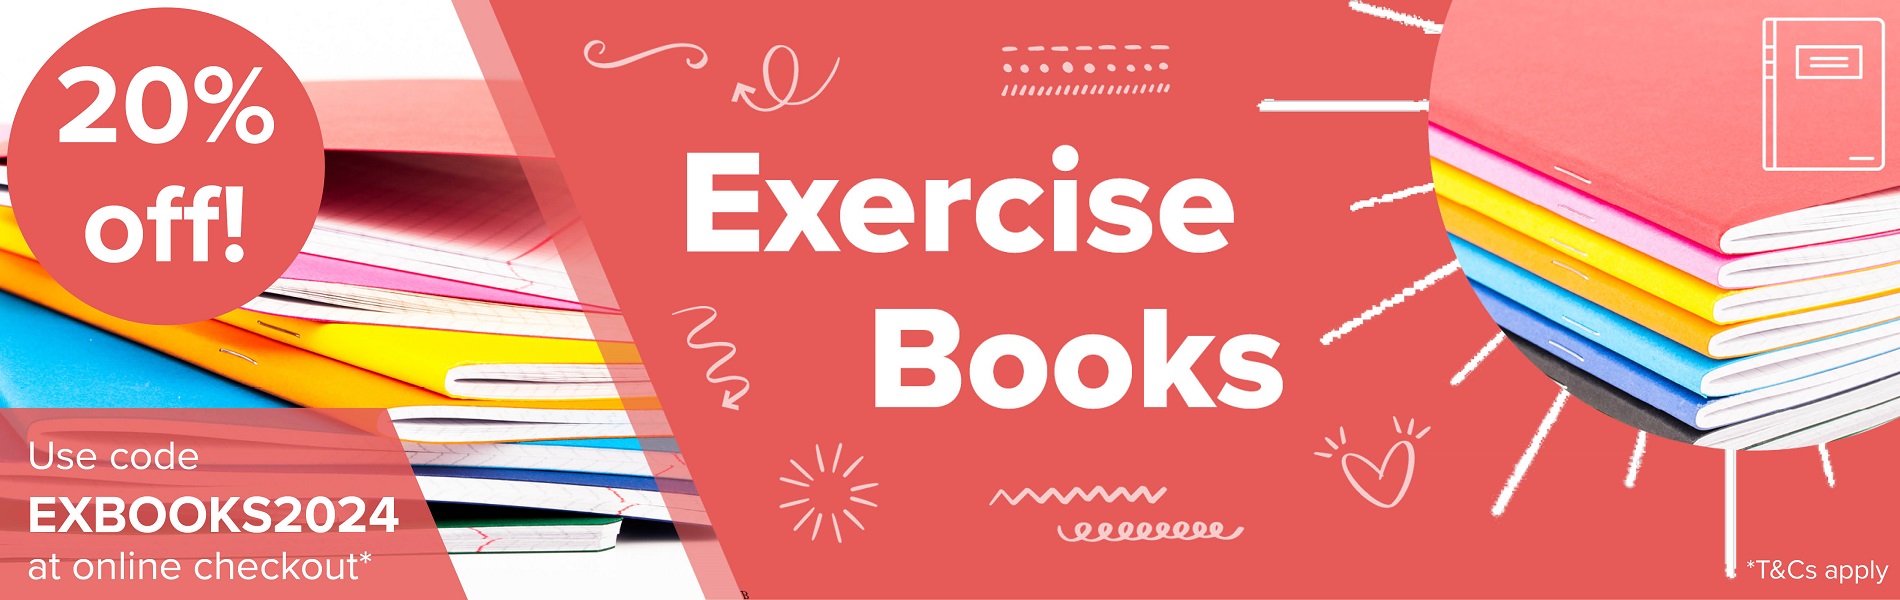 Stack of exercise books with red overlay and graphiti-style pen squiggles. Text says "20% off exercise books"